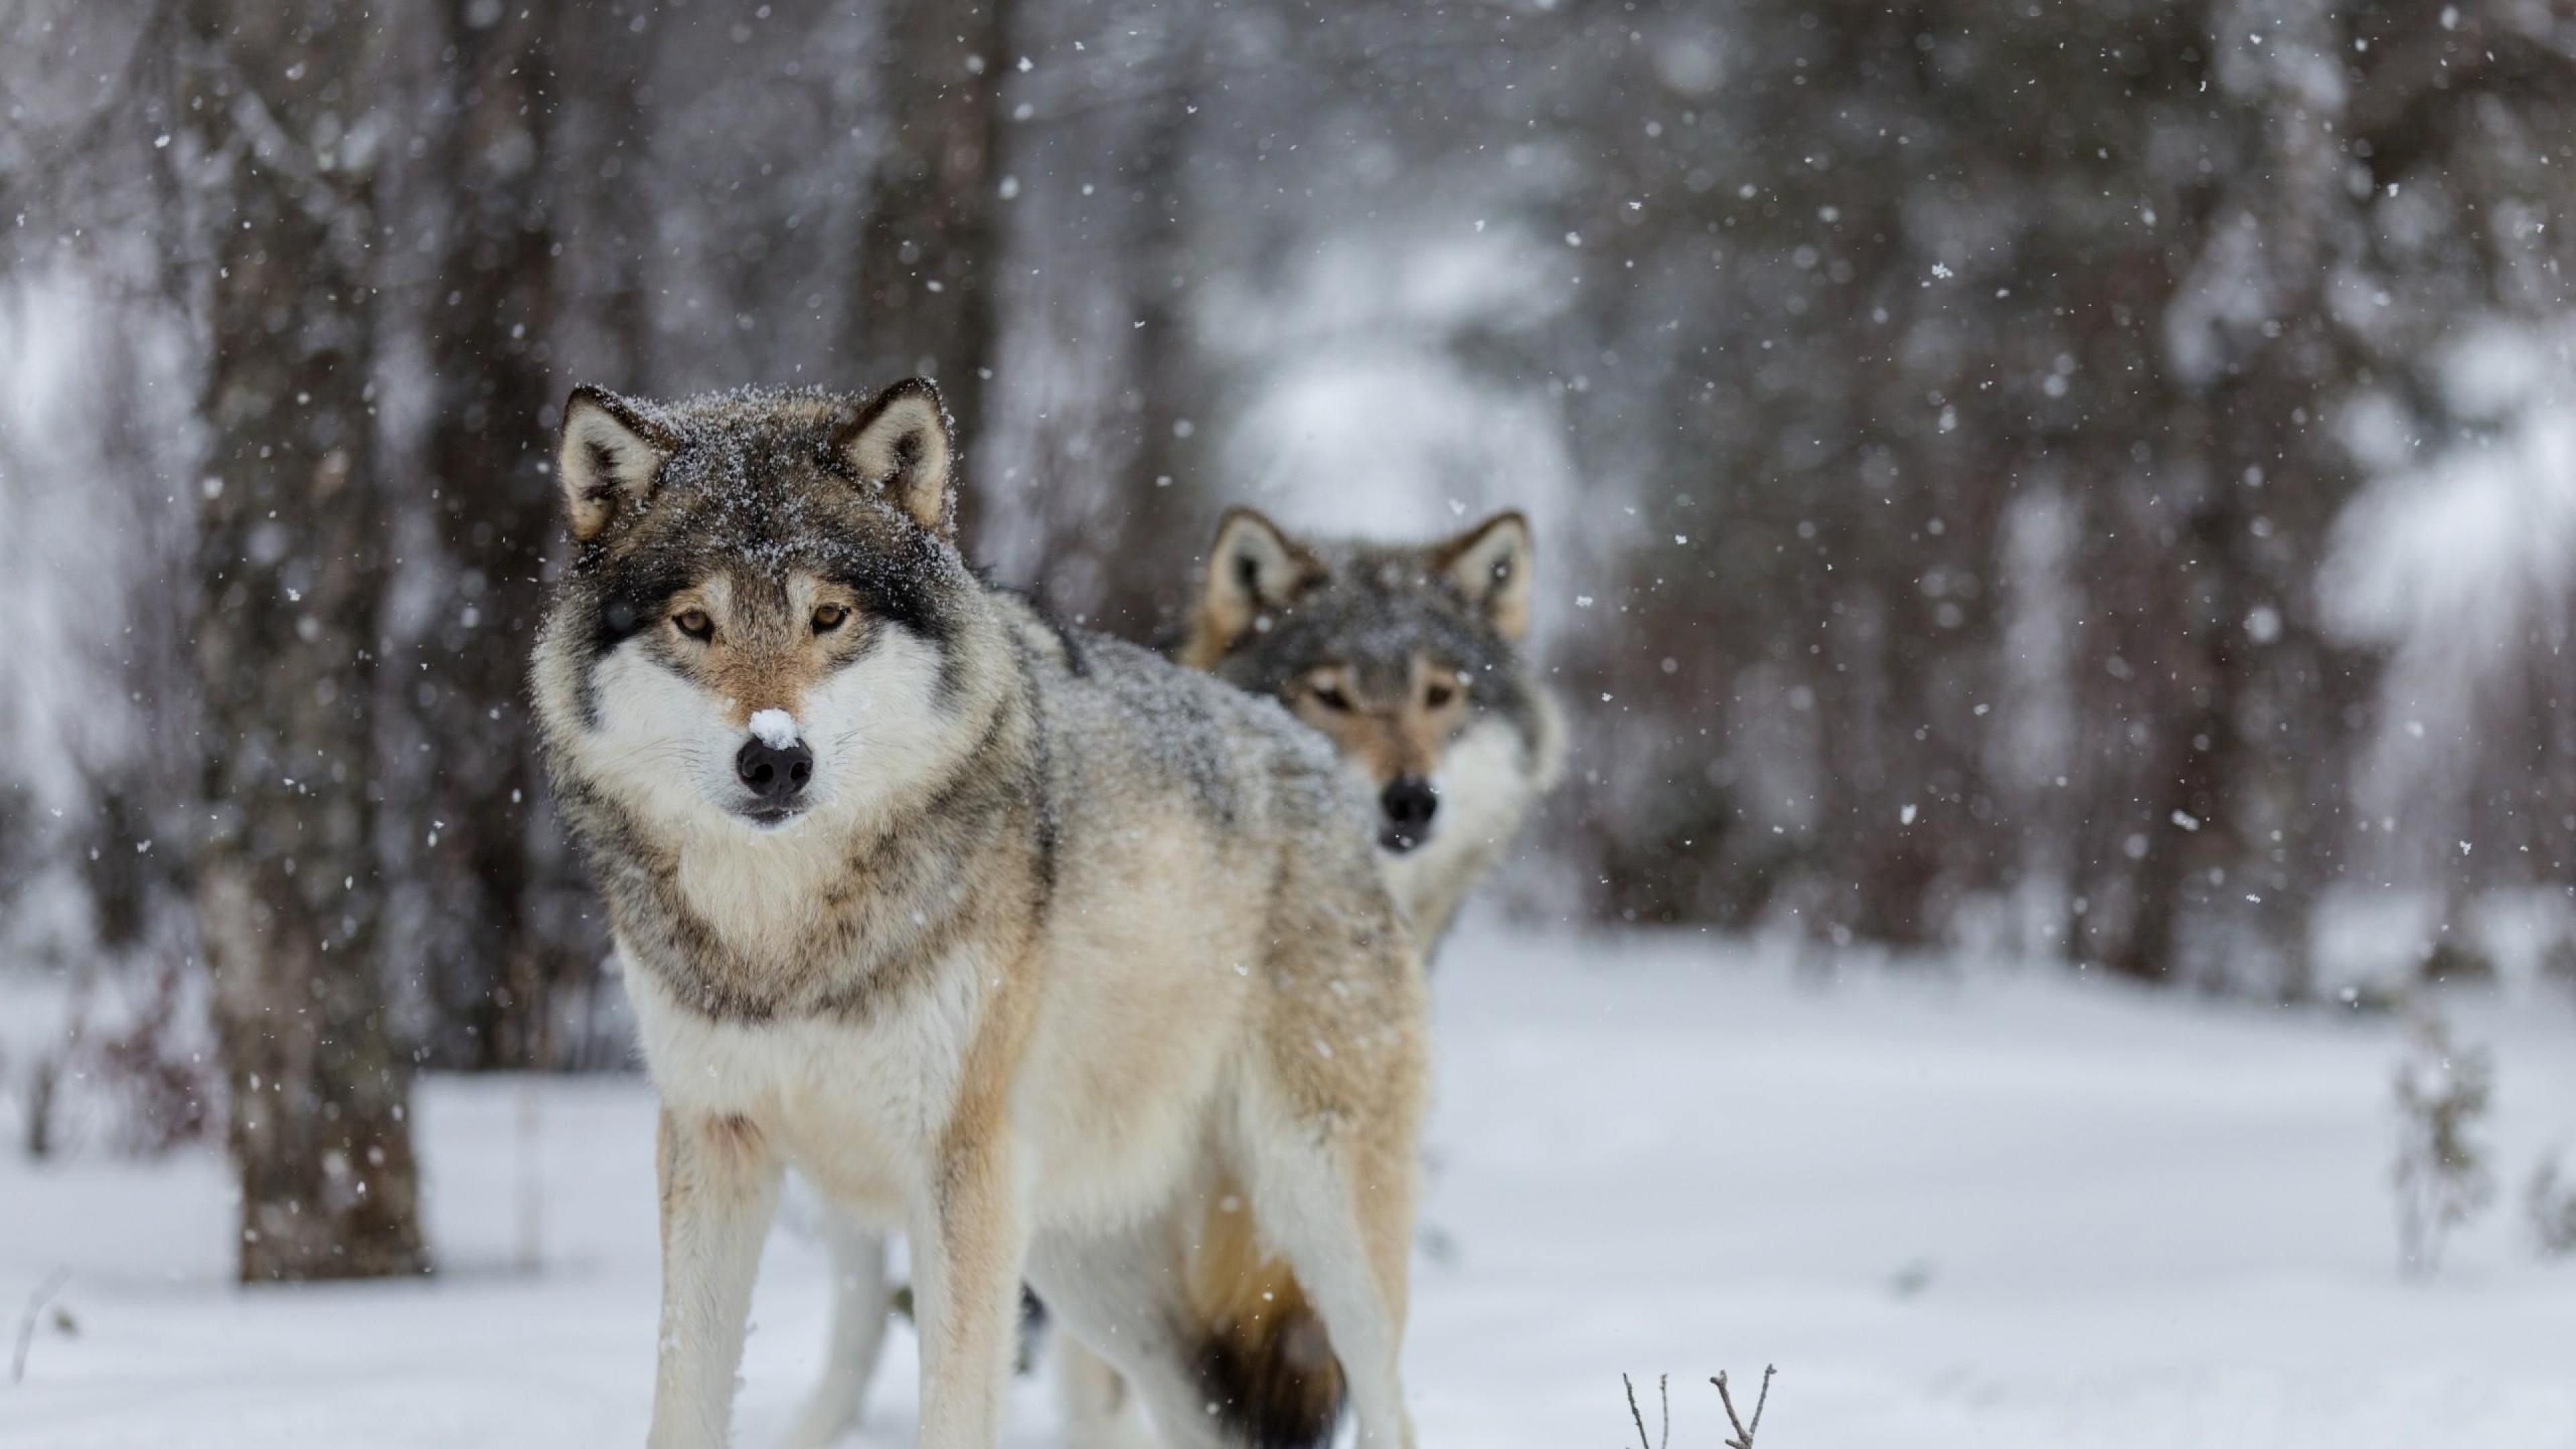 Gray Wolf: Timber wolves, Canines with long bushy tails that are often black-tipped. 3840x2160 4K Wallpaper.